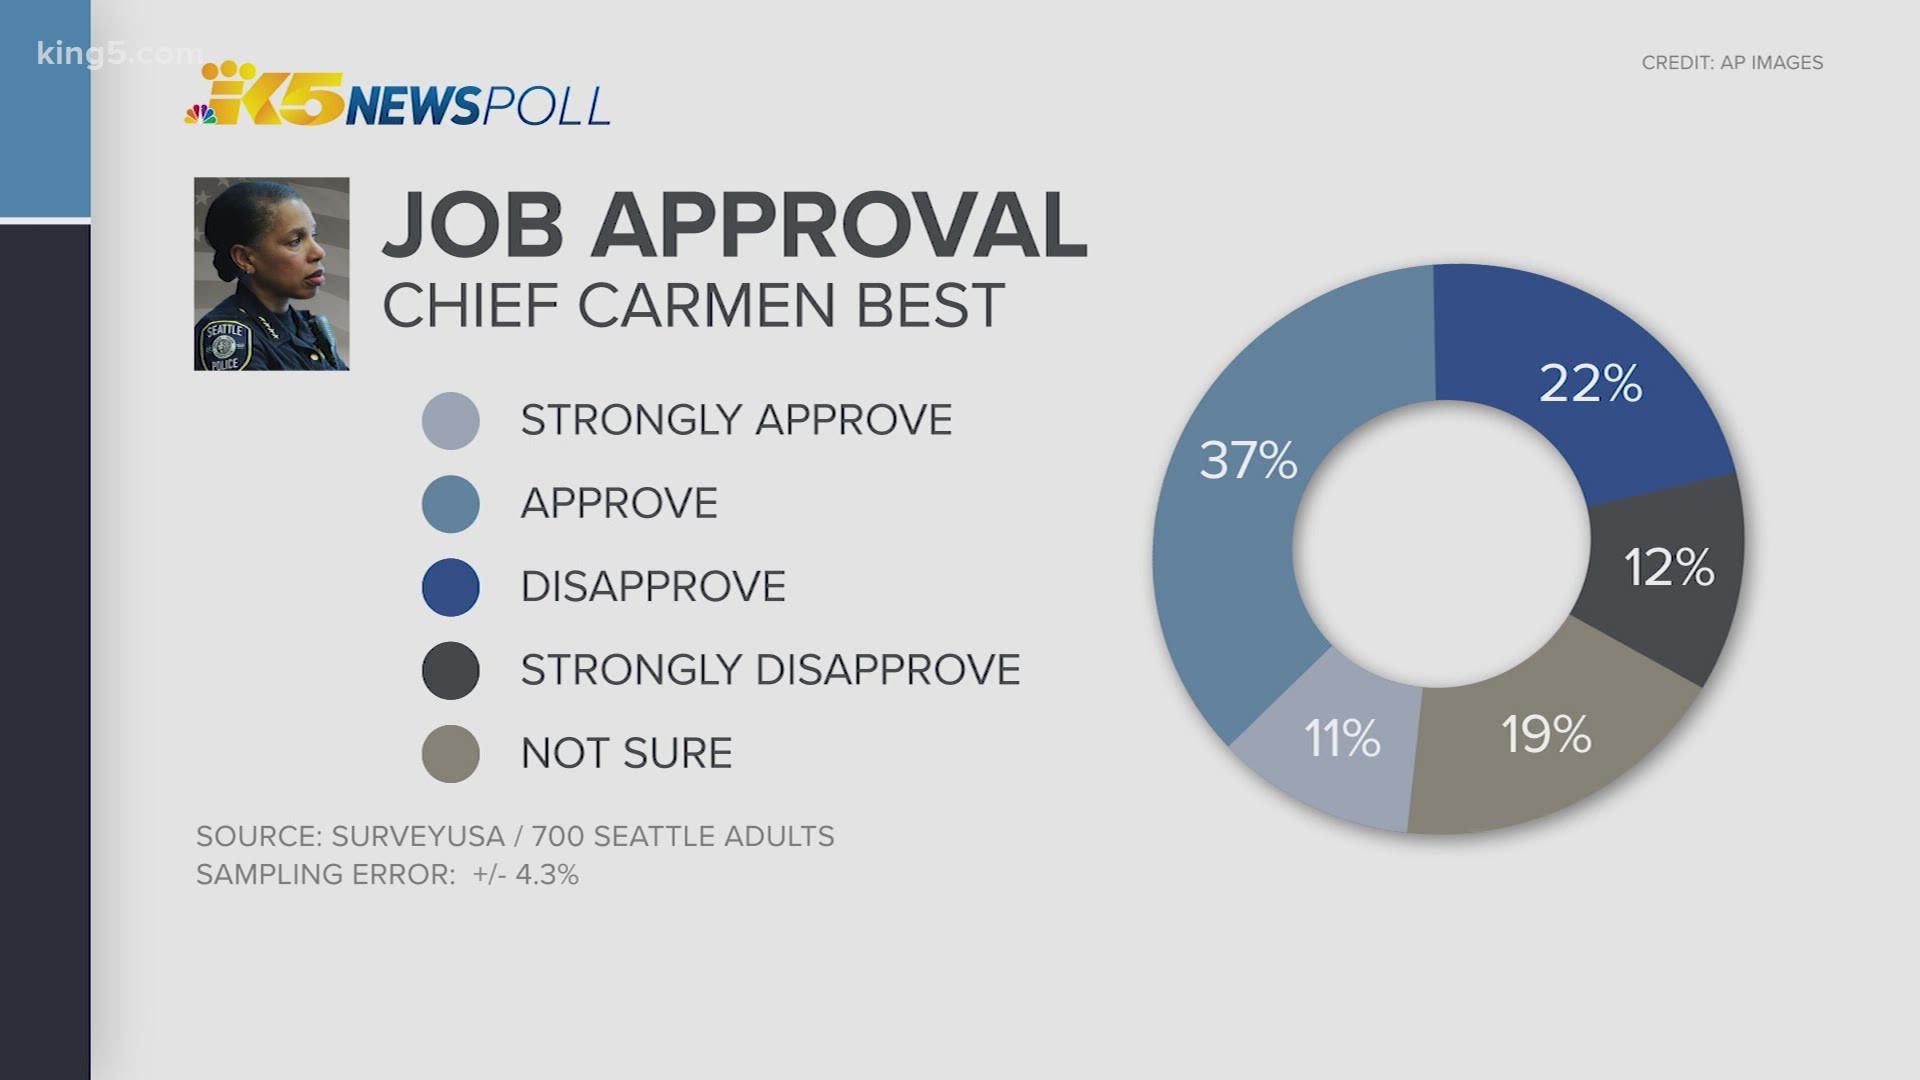 Of the 700 Seattle adults surveyed, 48% said they approved or strongly approved of the job Seattle Police Chief Carmen Best is doing.